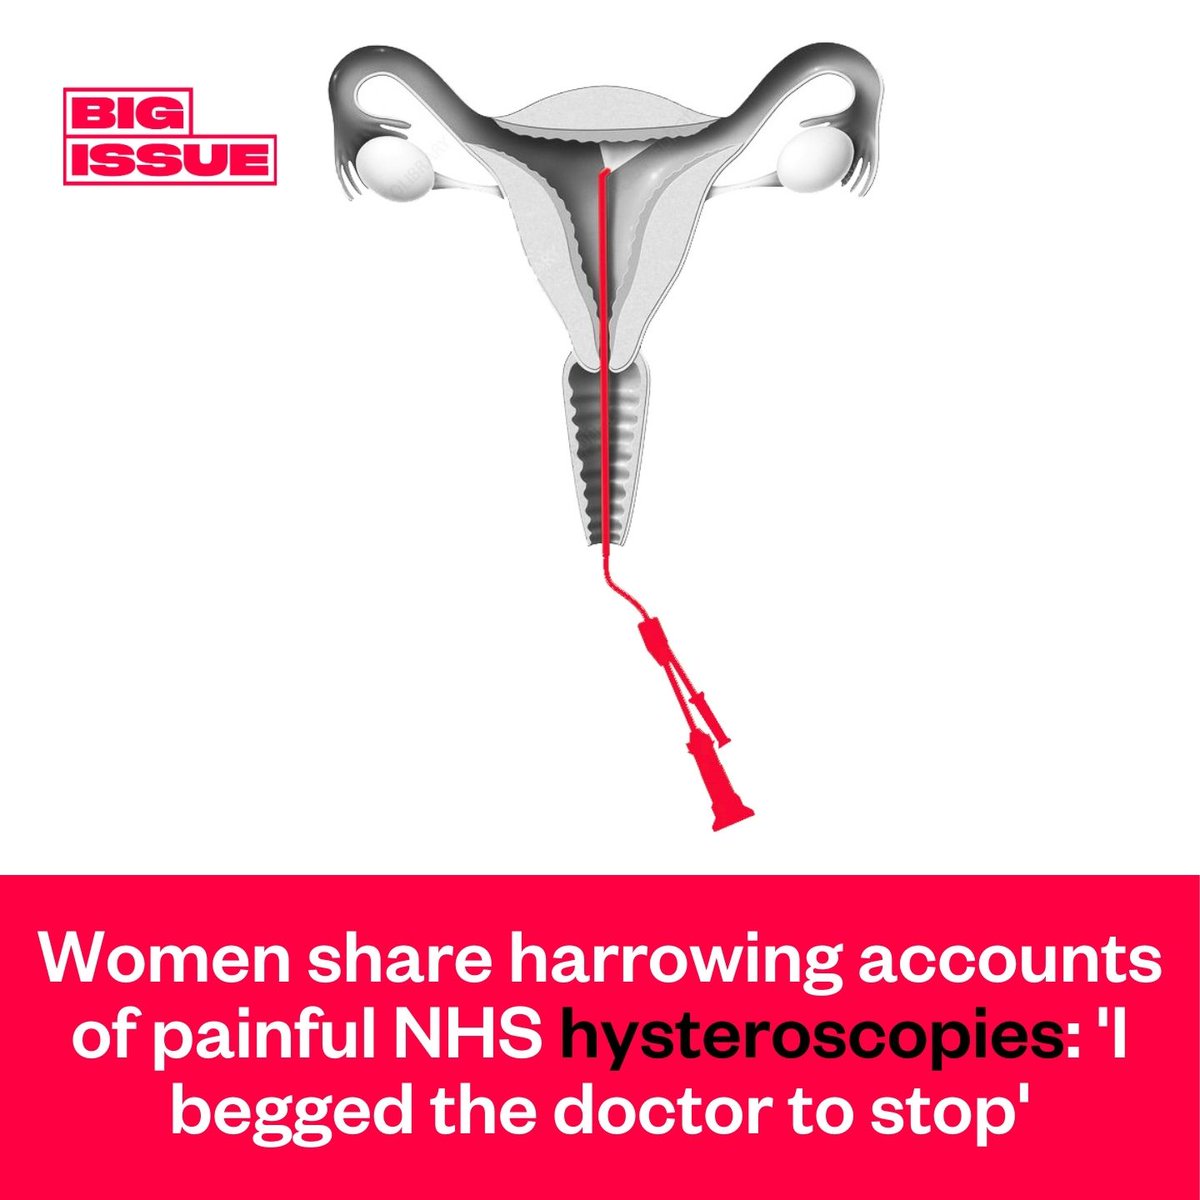 'You still feel like you’ve been lied to, treated like a farm animal and denied any kind of pain relief.' Two weeks ago we published an investigation into the pain many women face when undergoing hysteroscopies. Here are some of your responses ⤵️ bigissue.com/news/activism/…